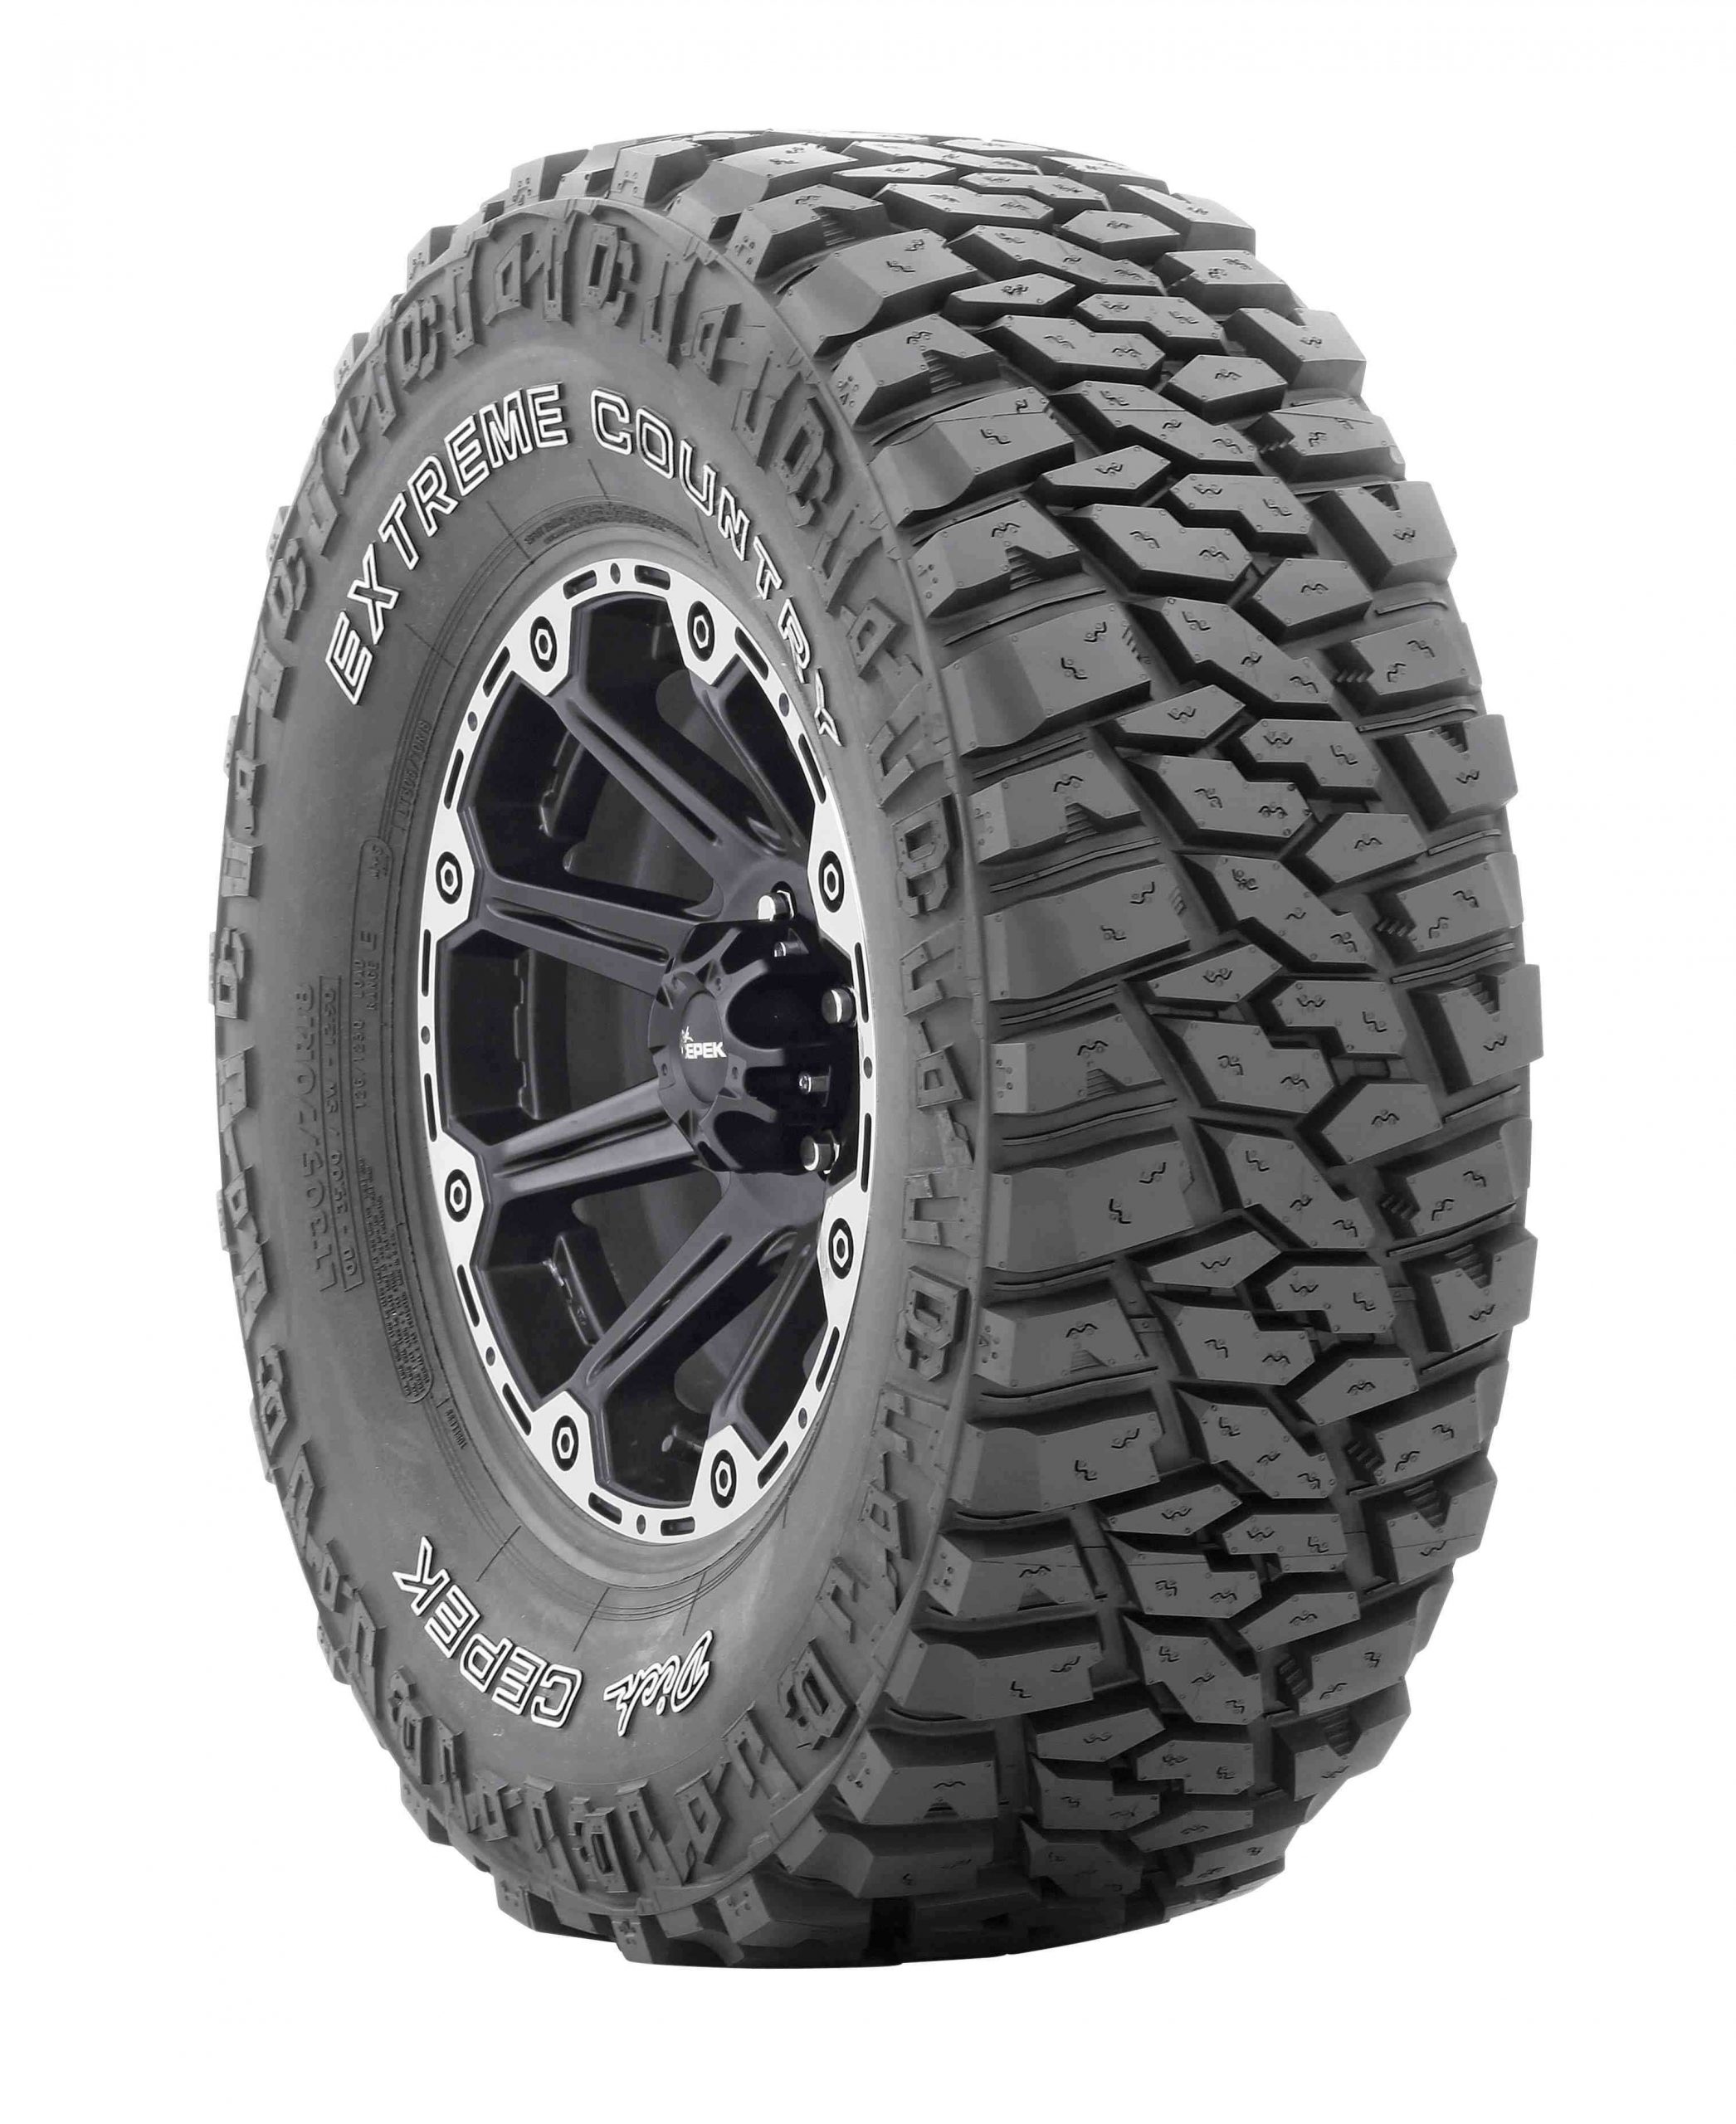 <p><b>DICK CEPEK MUD-TERRAIN EXTREME COUNTRY</b> 
For anglers who donât always use concrete ramps to launch boats in bass waters, street tires simply do not get the job done. So, consider this radial mud tire from Dick Cepek. The Mud-Terrain Extreme Country features special chambers and notched inner and outer lugs for lug stability and responsive bite on irregular surfaces. The tire is available in 21 sizes from 15- to 20-inch rim diameter.</p>
